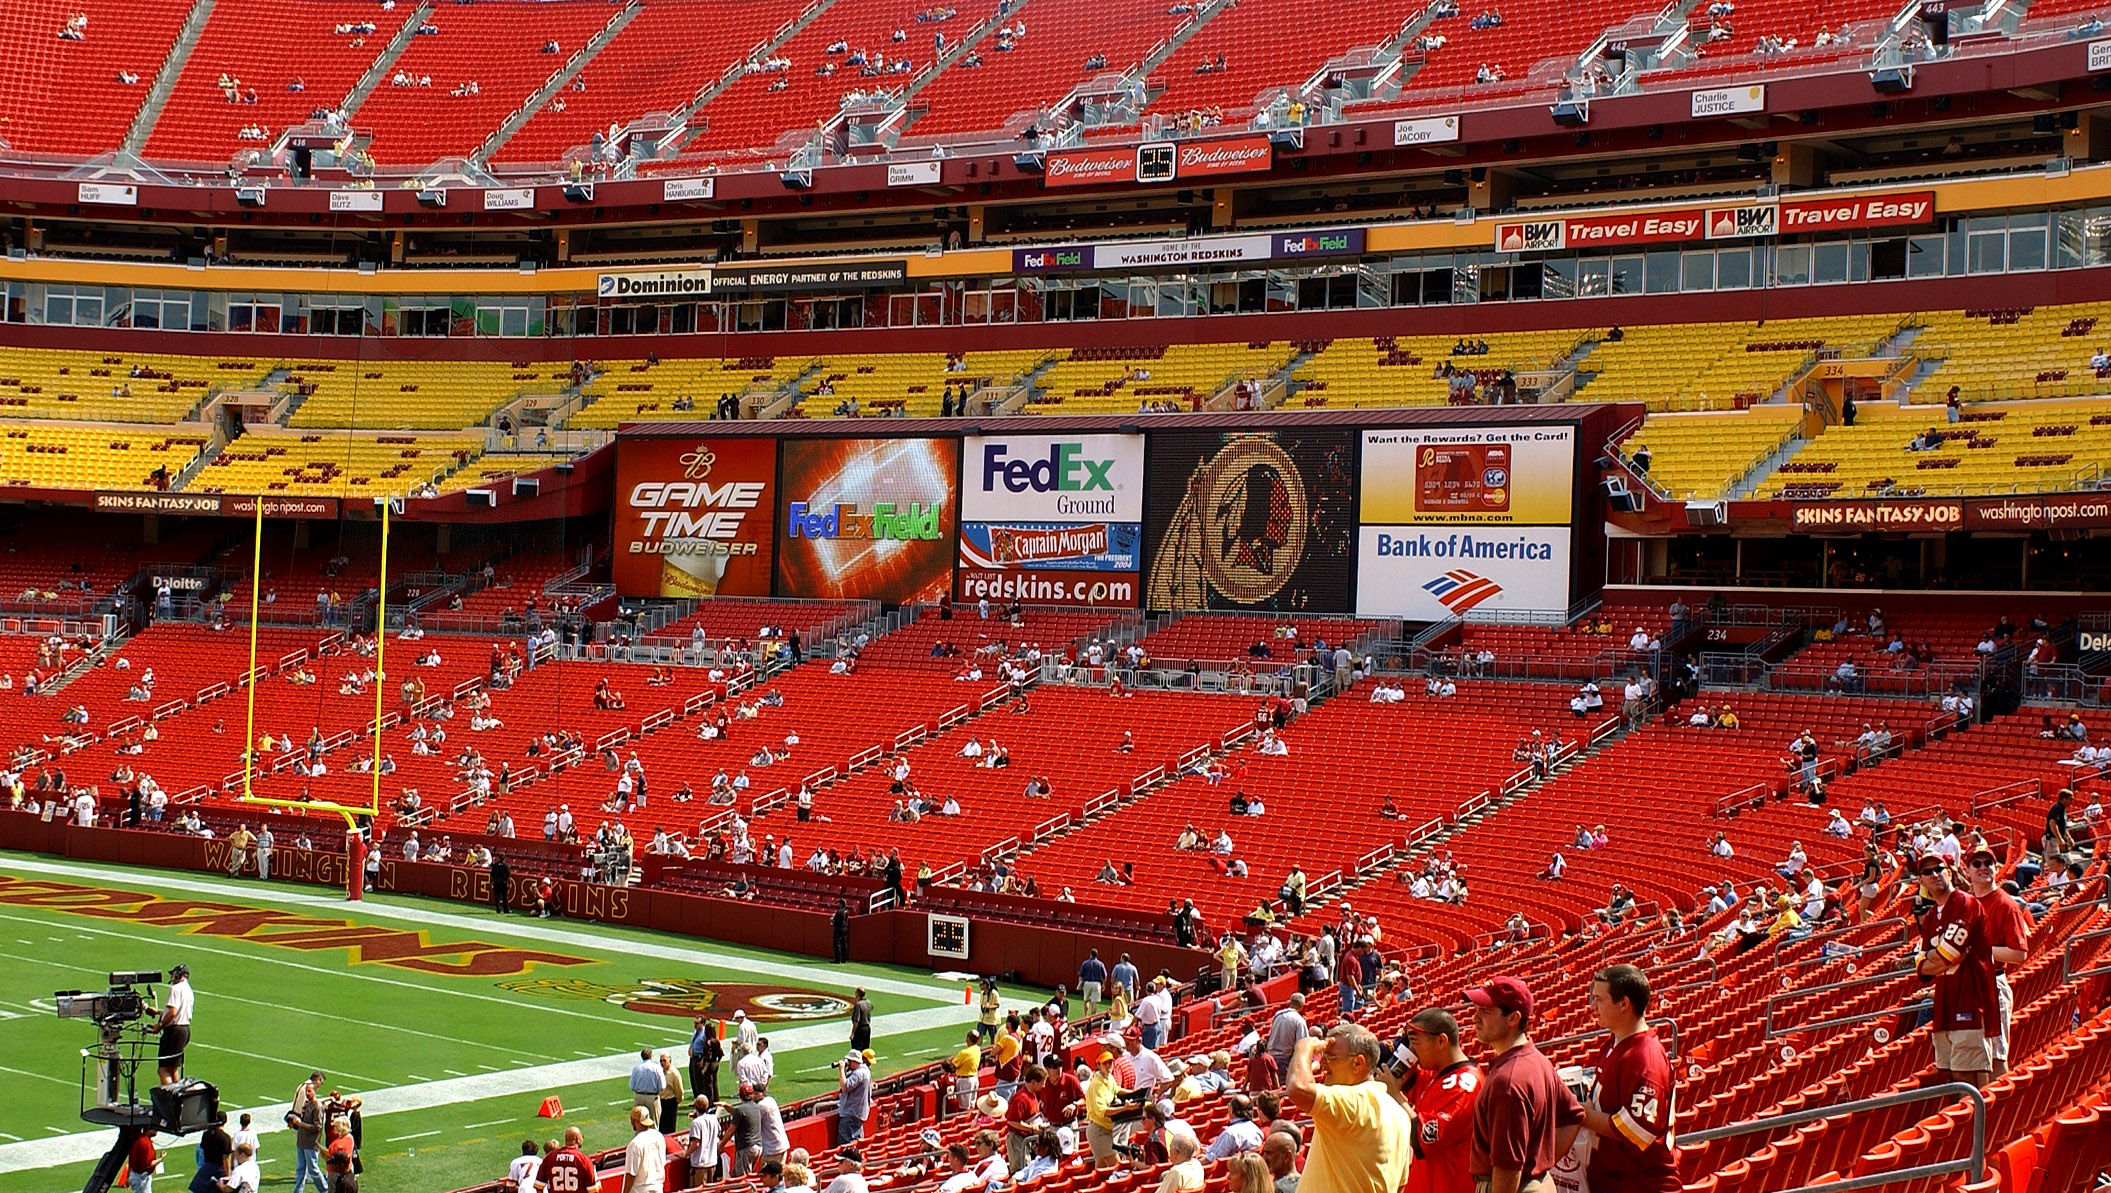 These Are The Dirtiest, Most Expensive Stadiums In The NFL, According